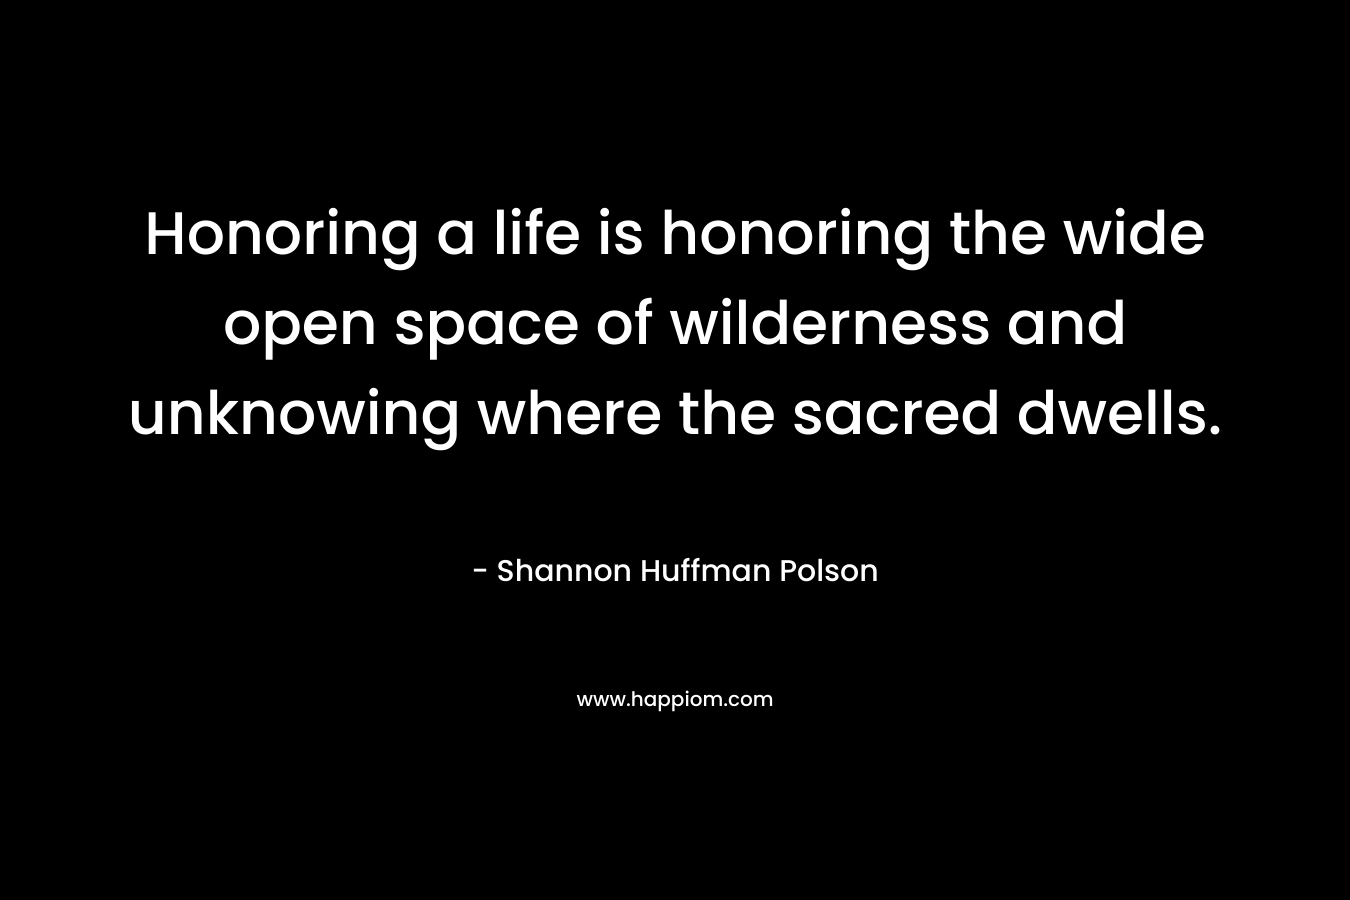 Honoring a life is honoring the wide open space of wilderness and unknowing where the sacred dwells.